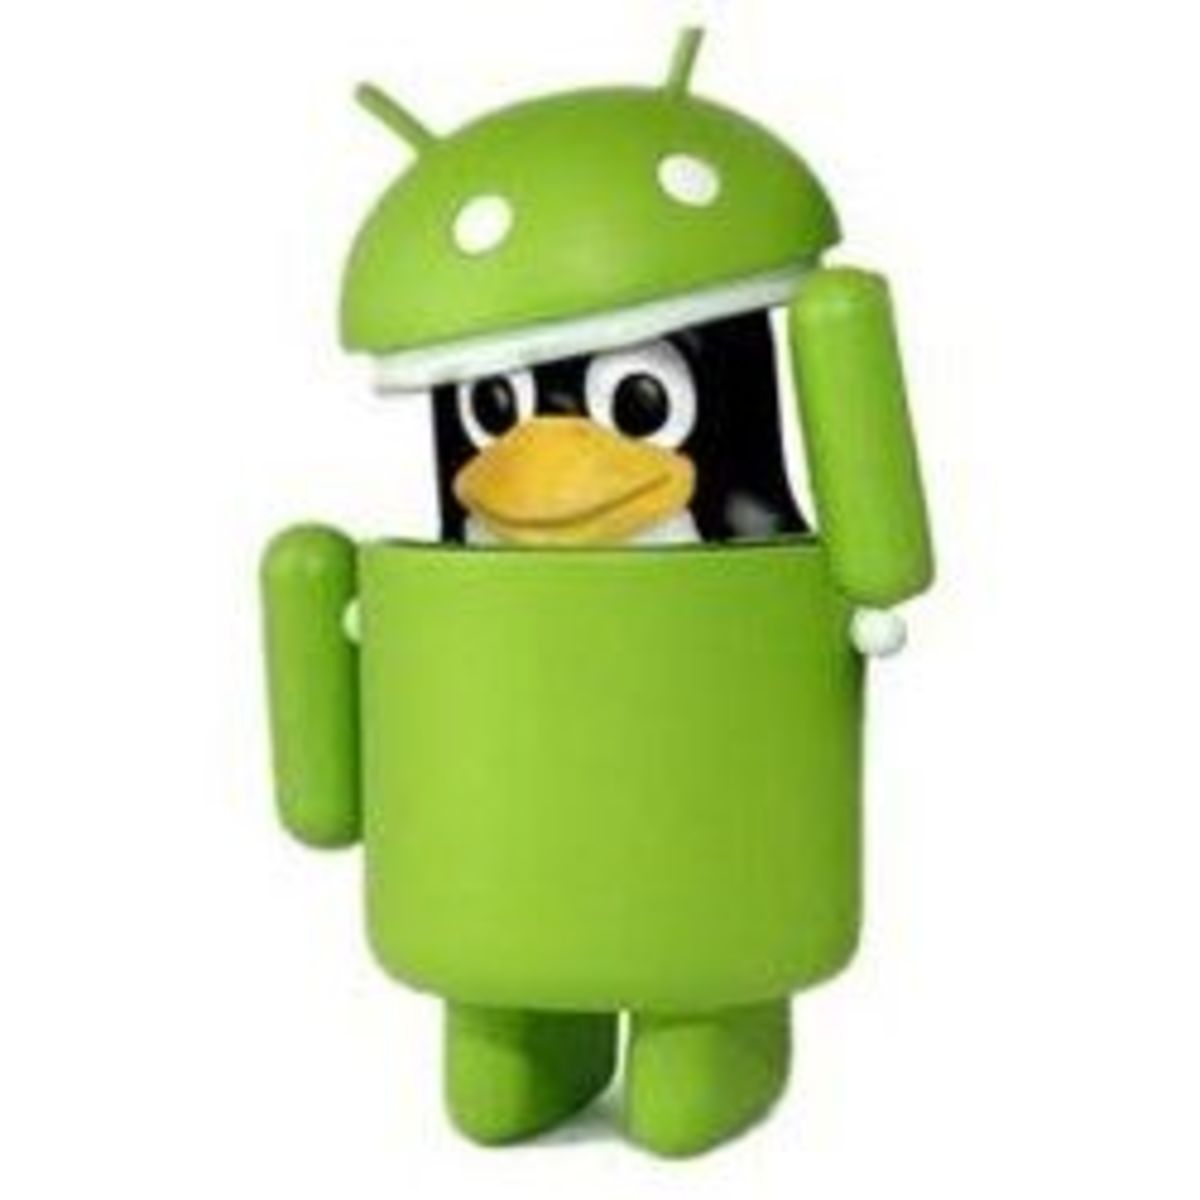 mk802-android-firmware-linux-upgrade